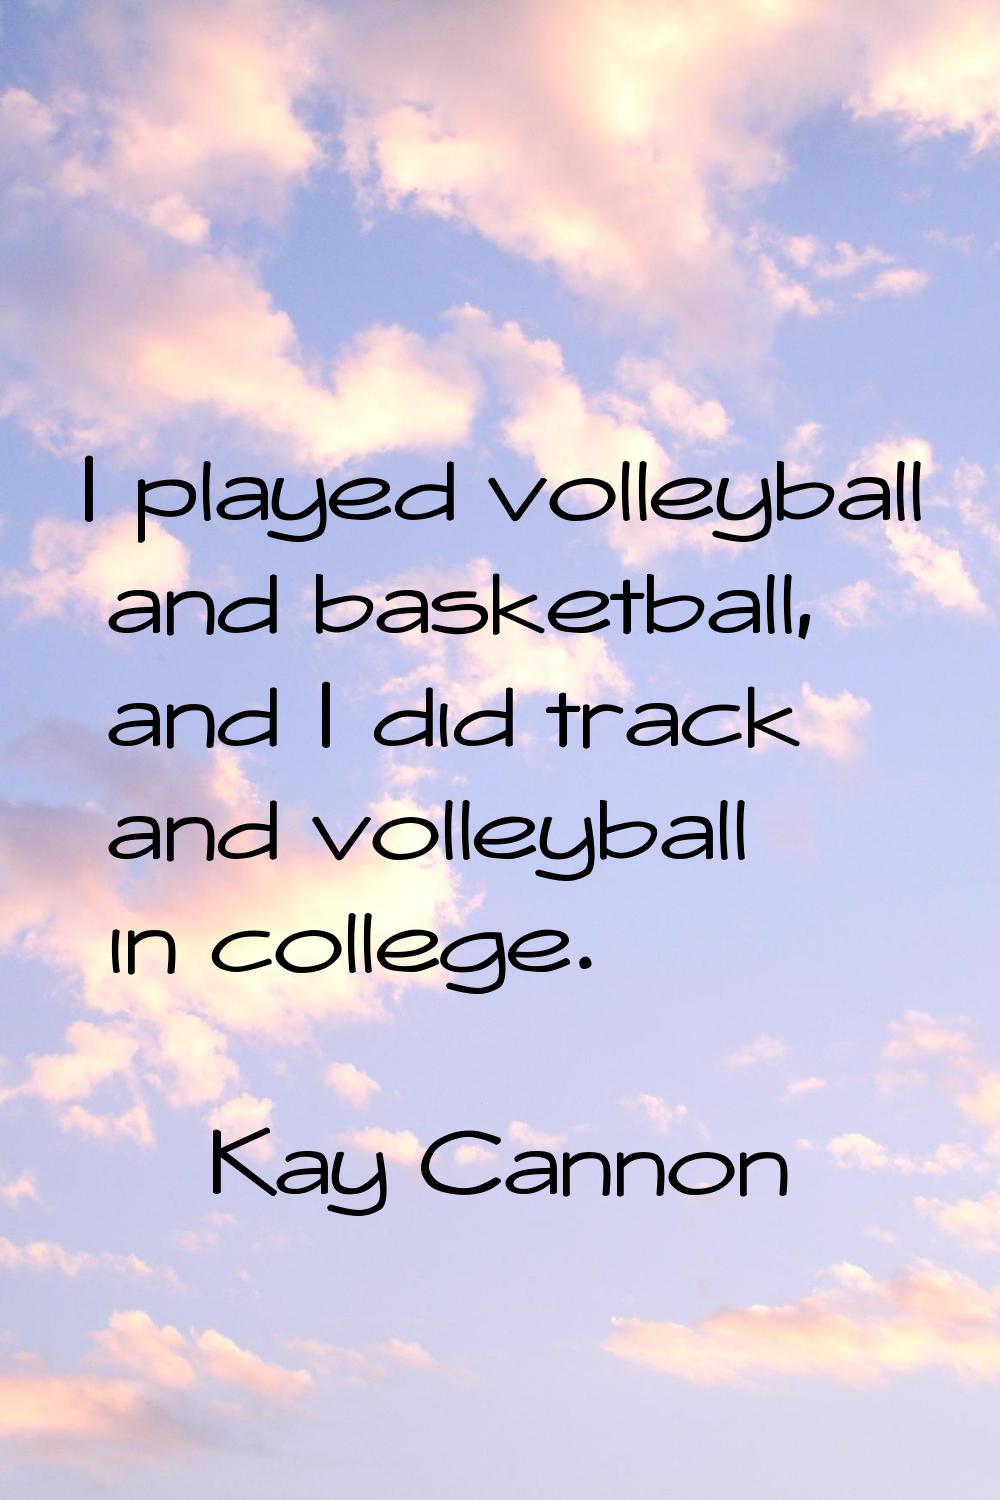 I played volleyball and basketball, and I did track and volleyball in college.